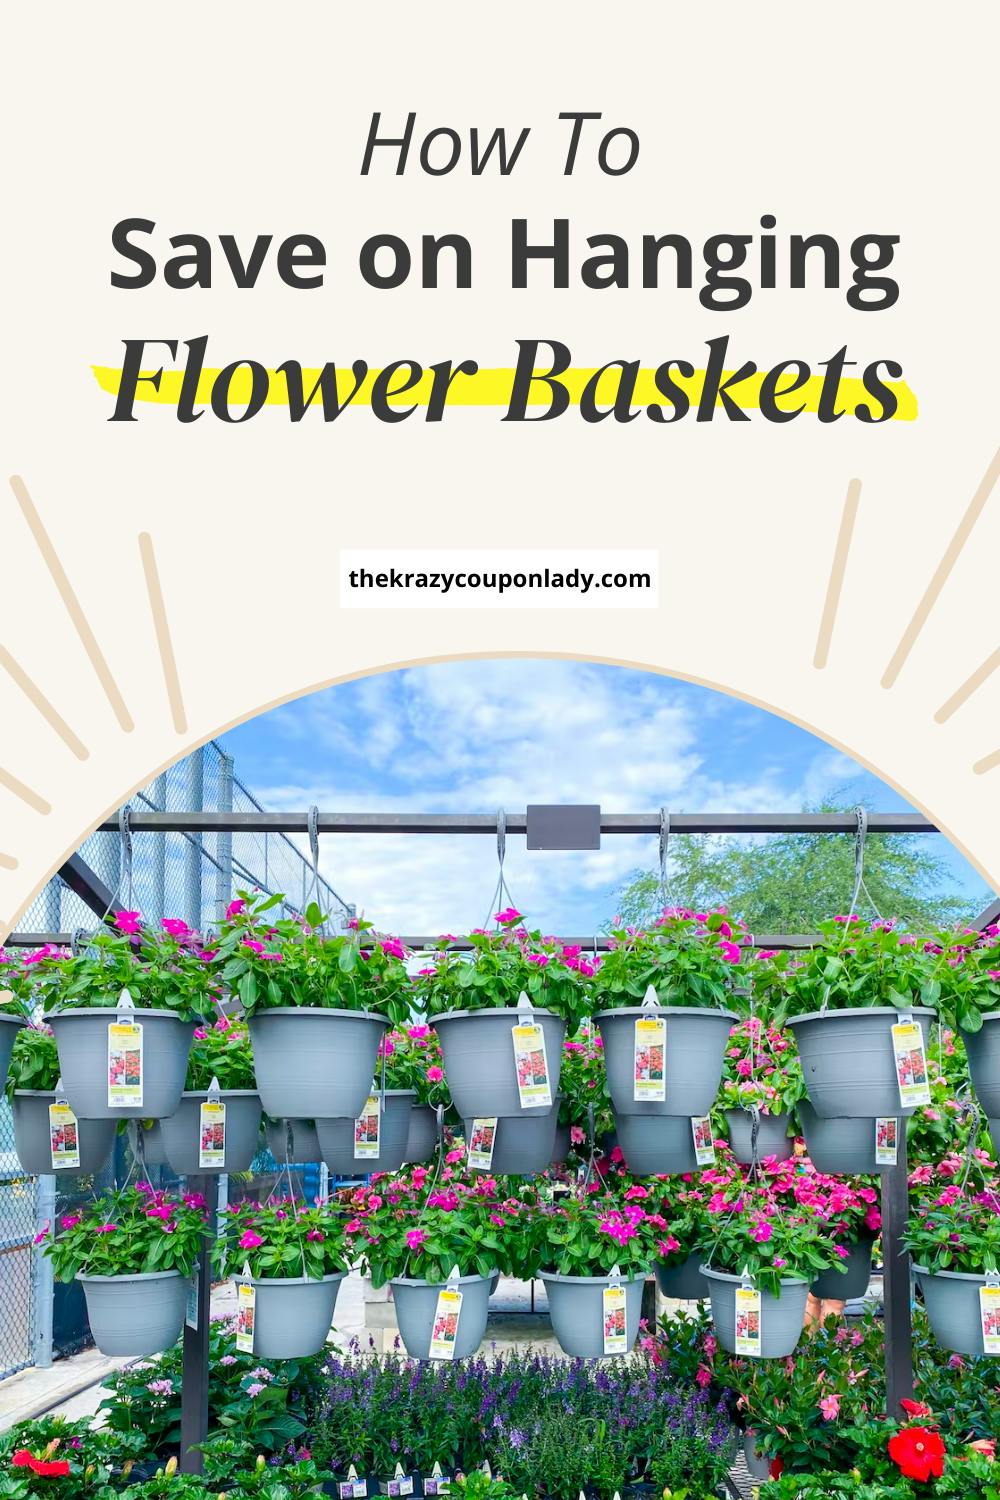 How to Save on Hanging Flower Baskets